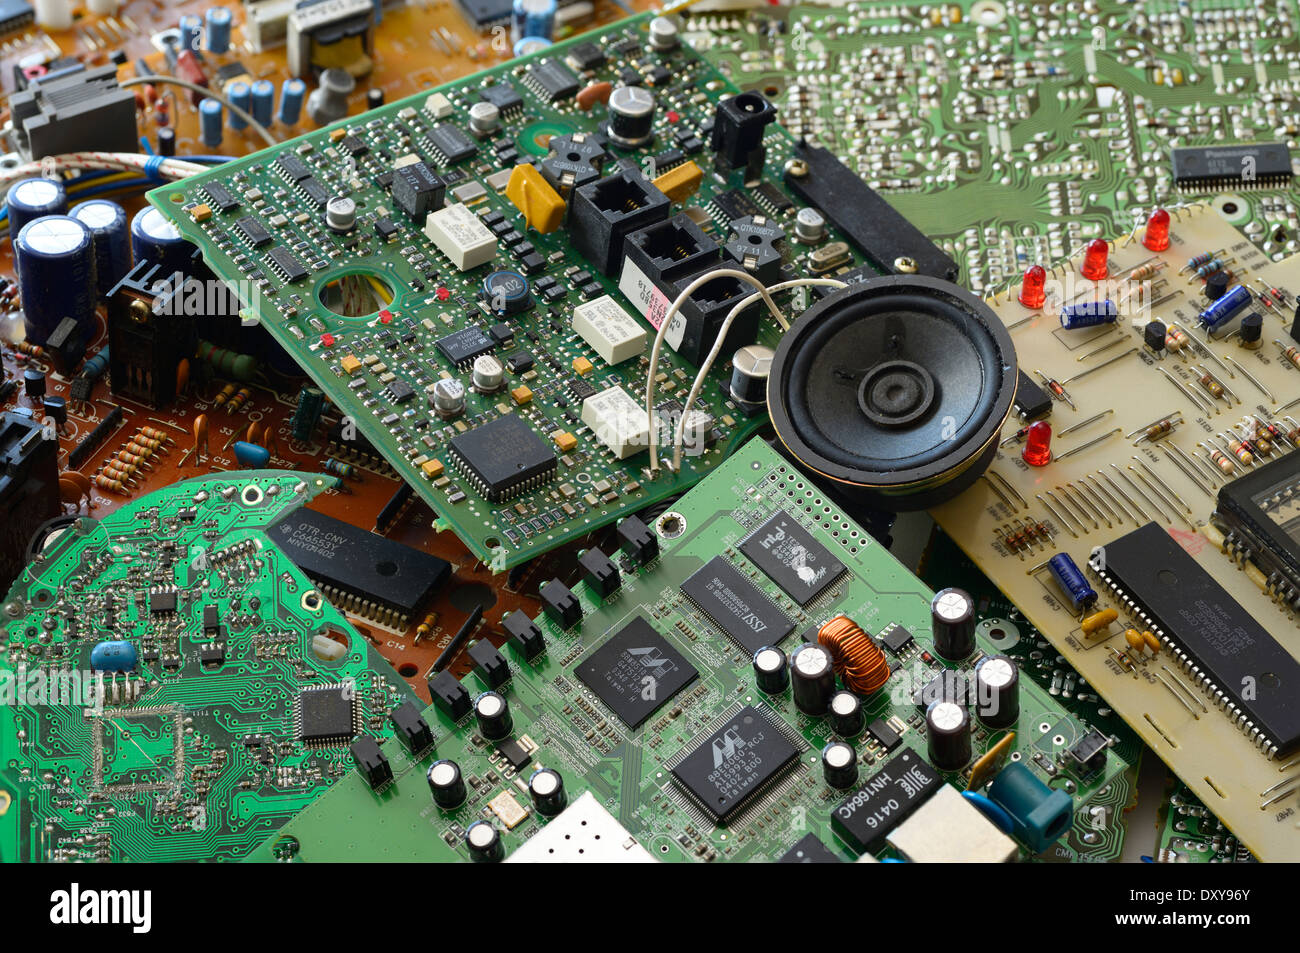 Collection of junk electronic components with microchips and integrated printed circuit boards Stock Photo